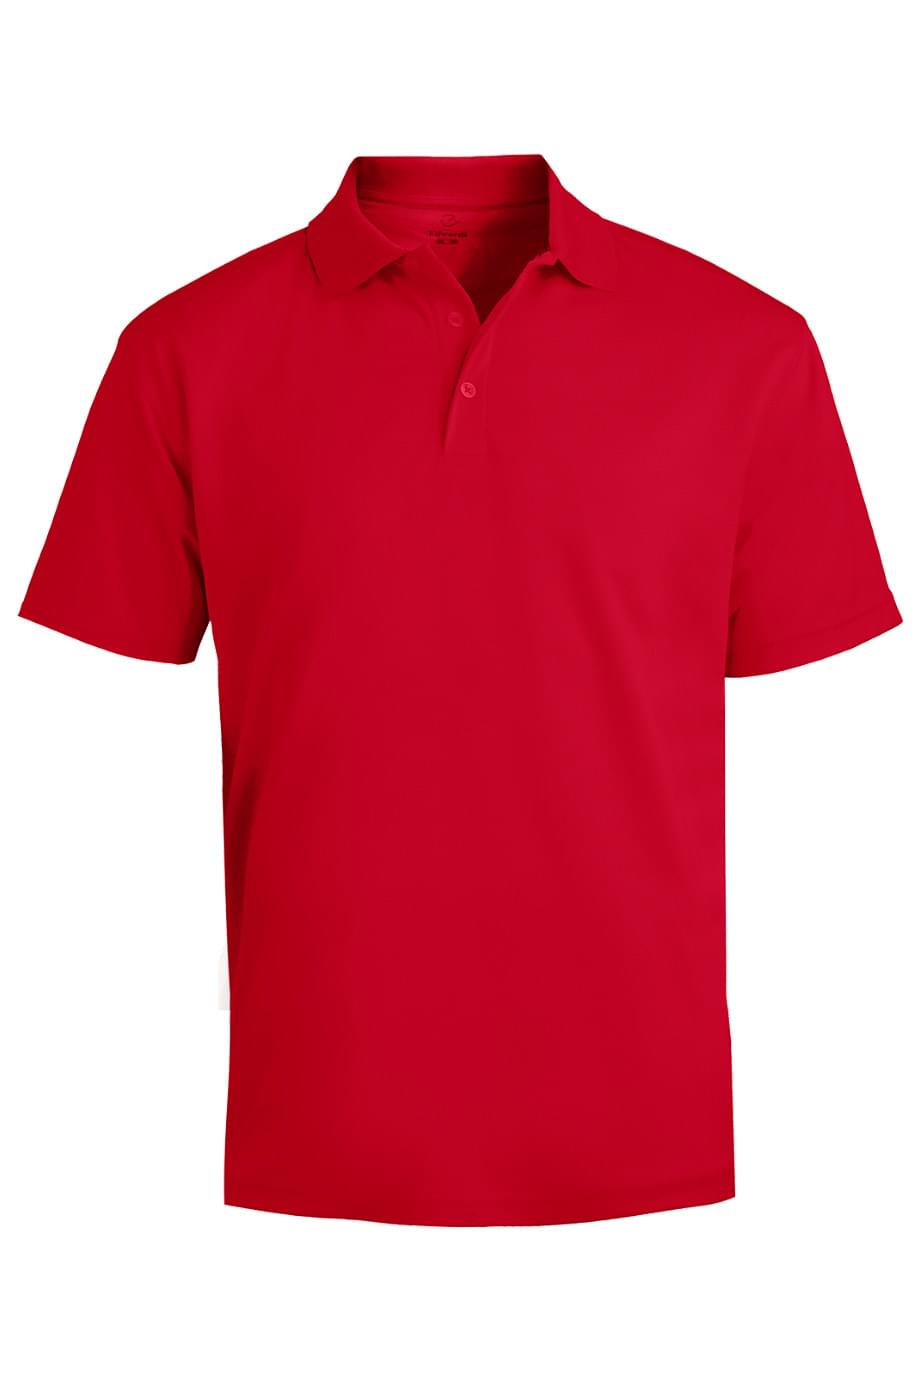 red men's polo, men's red polo shirts